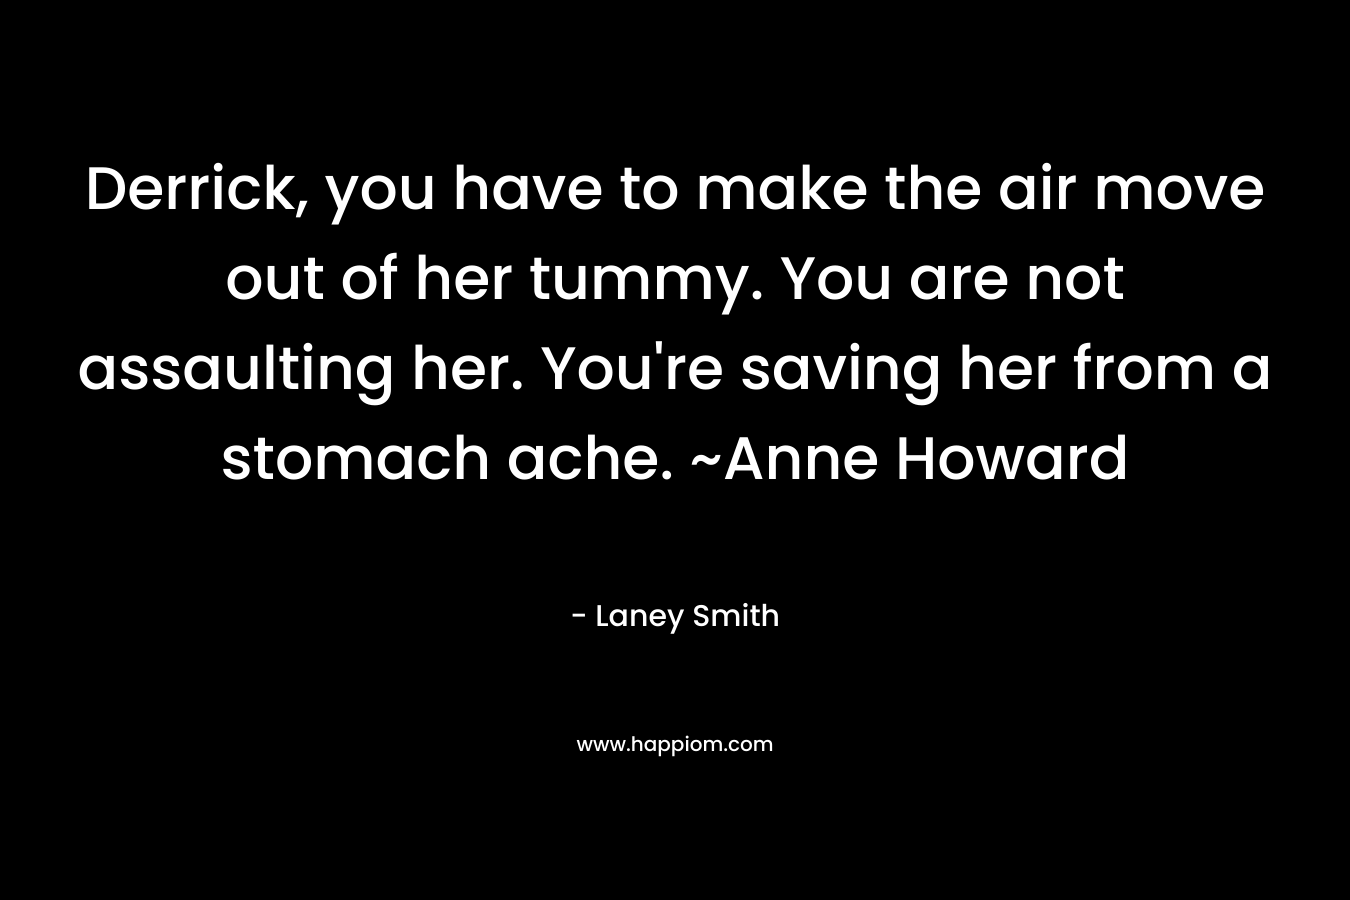 Derrick, you have to make the air move out of her tummy. You are not assaulting her. You're saving her from a stomach ache. ~Anne Howard